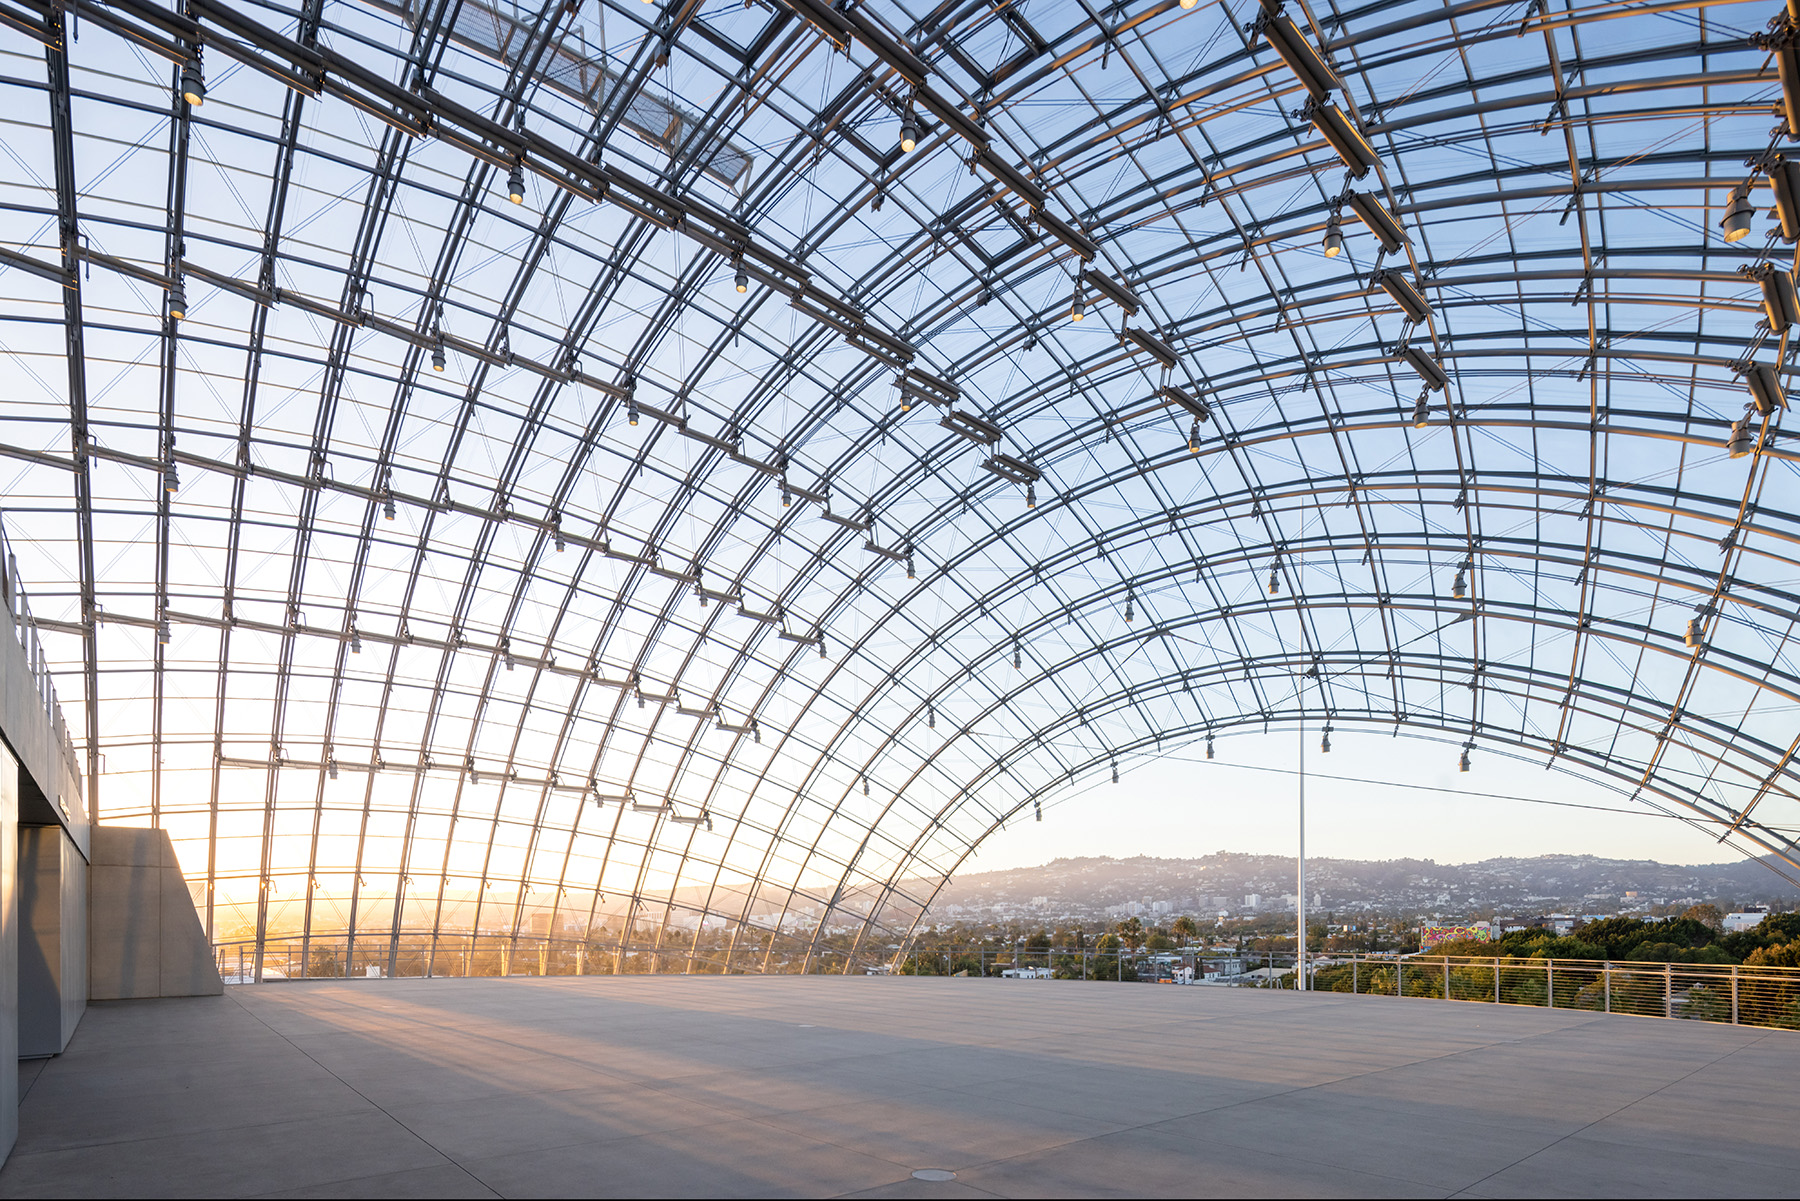 Spherical glass canopy covers a concrete slab